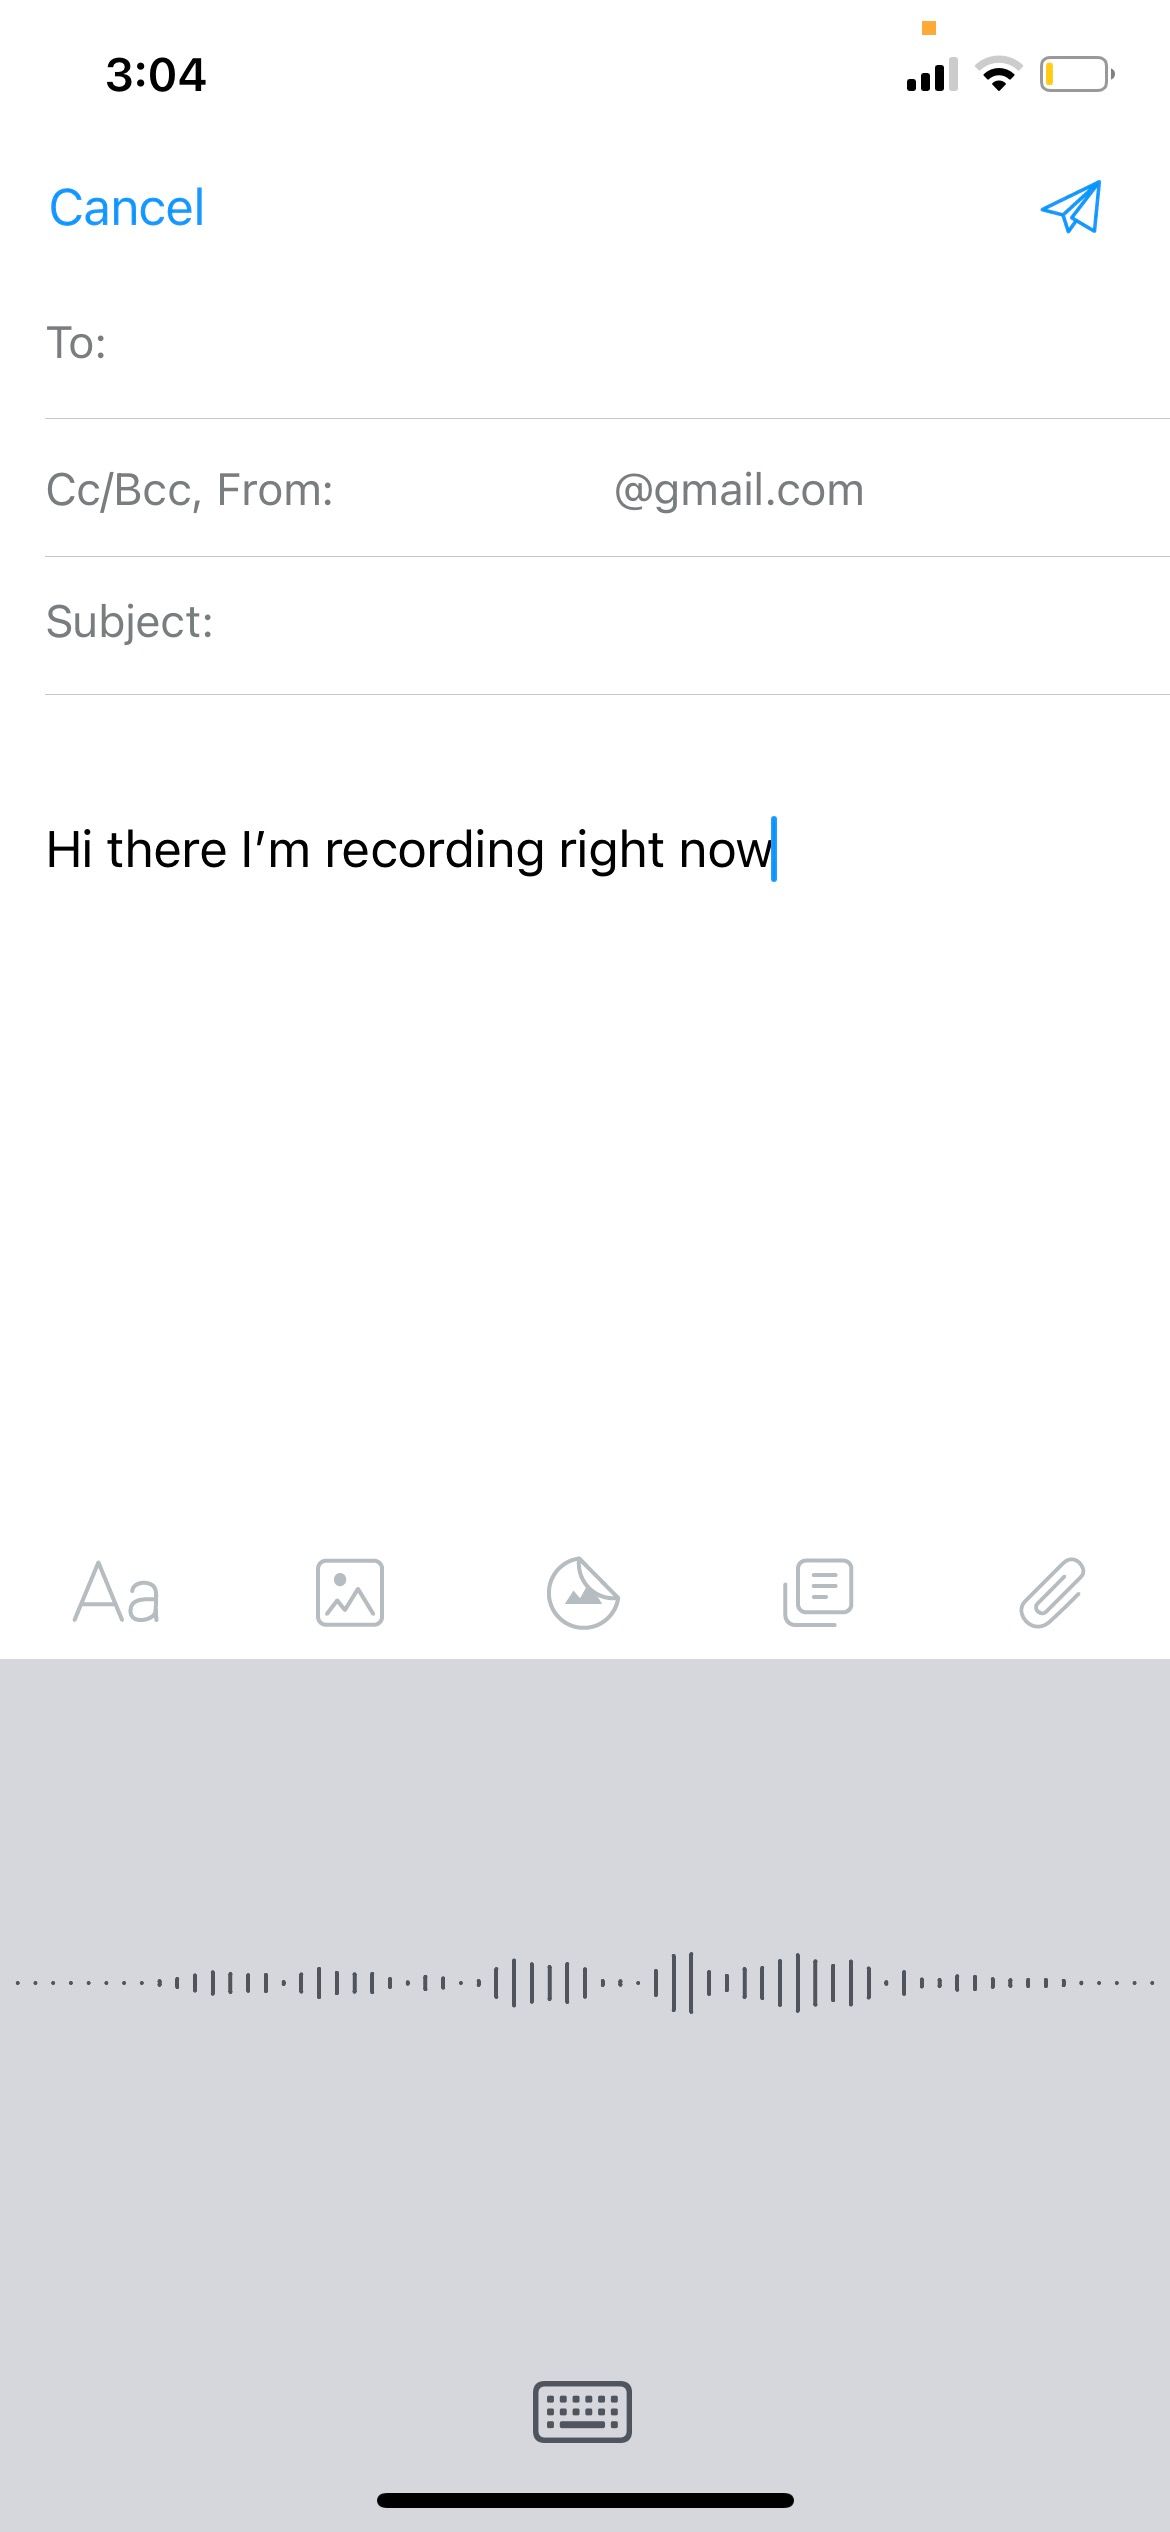 iPhone Dictation on Email with dictated text